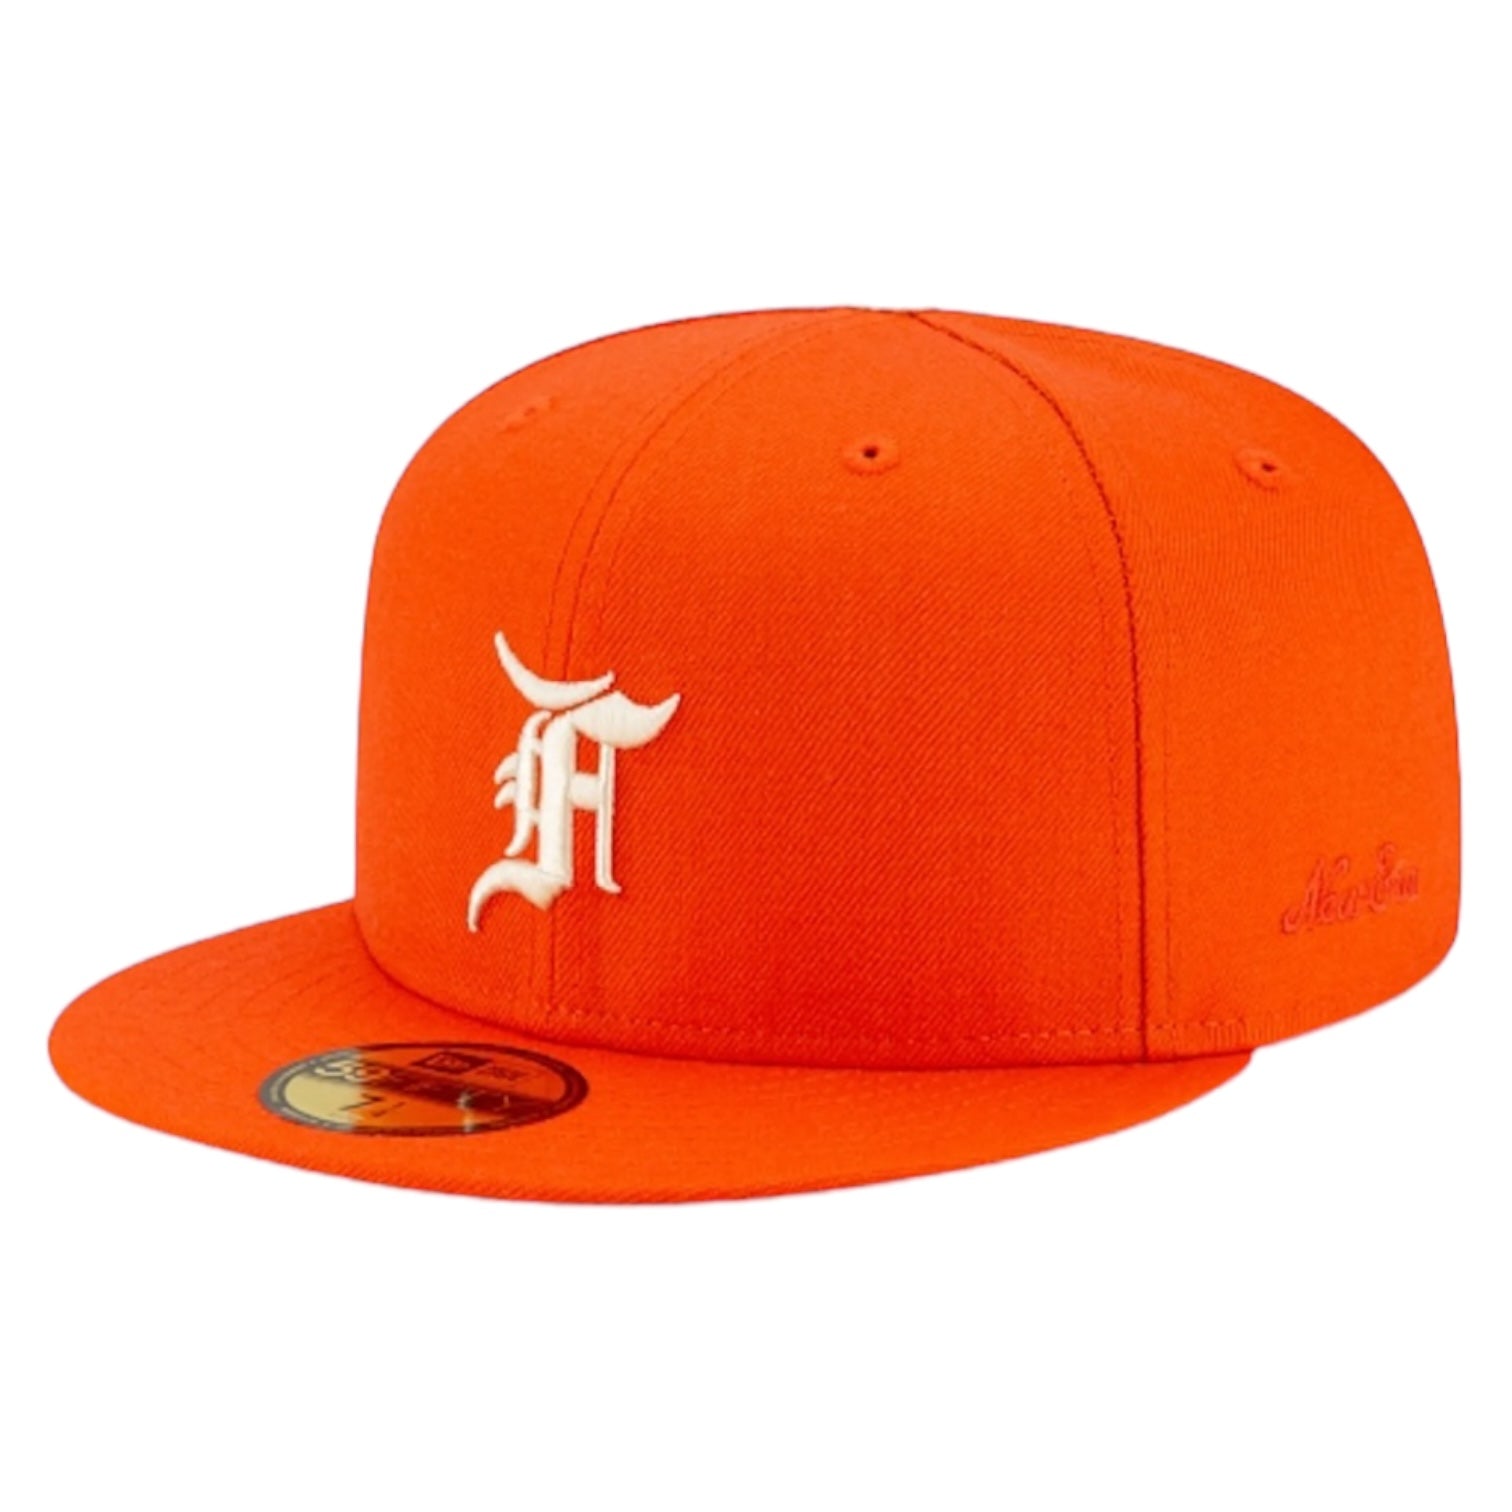 Fear of God Essentials x New Era Fitted Hat Orange - Fear of God Hat